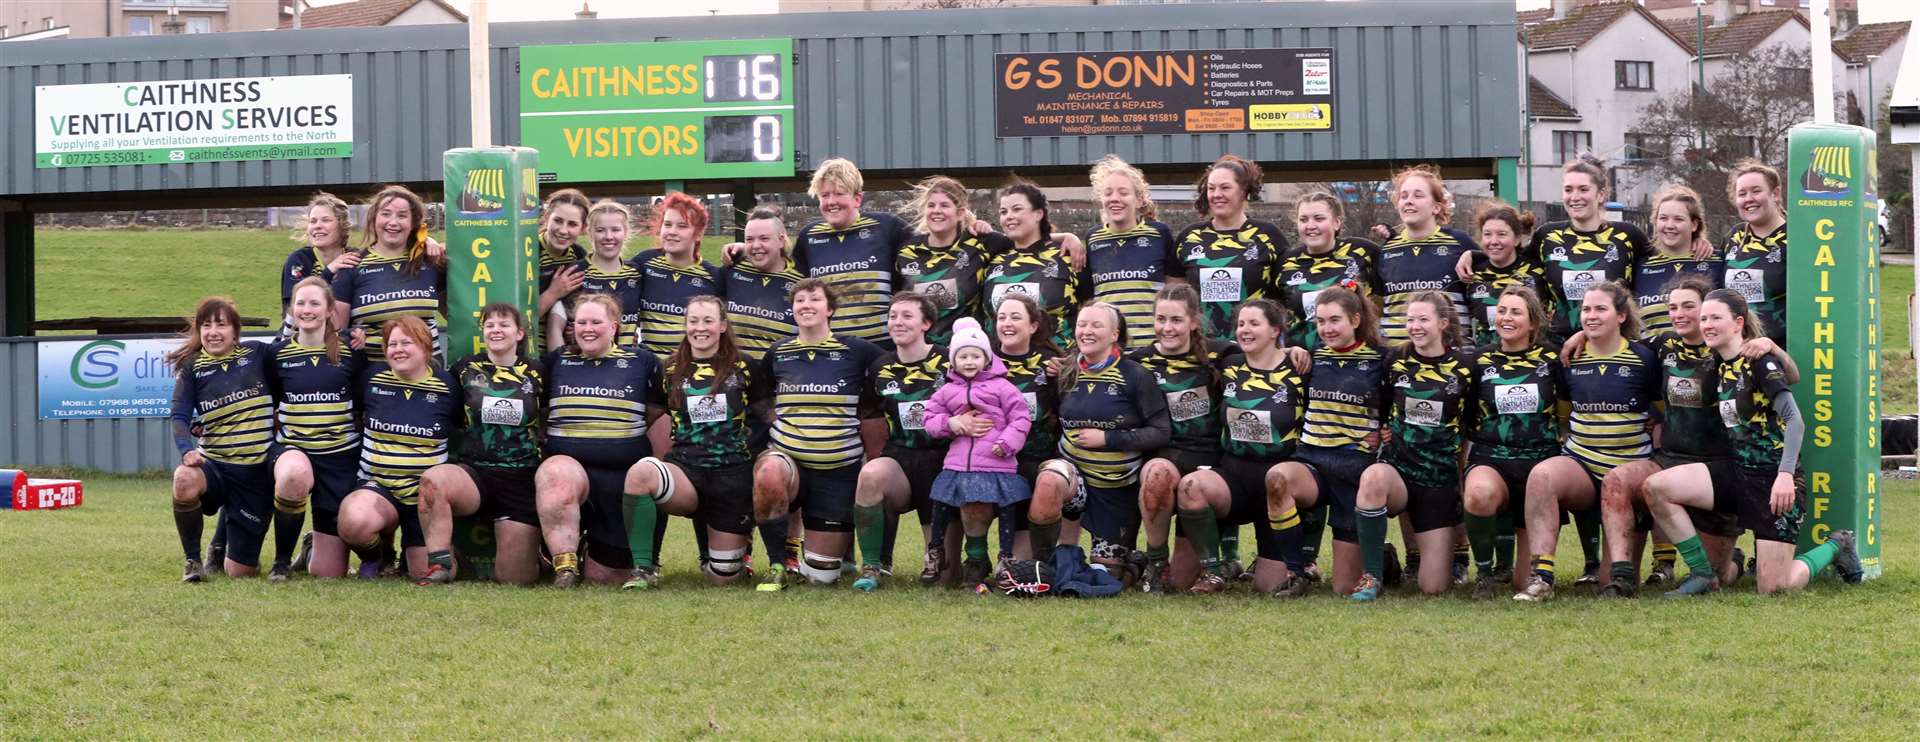 Caithness Krakens and Dundee Valkyries 2nd XV get together for a group photo at Millbank. Picture: James Gunn